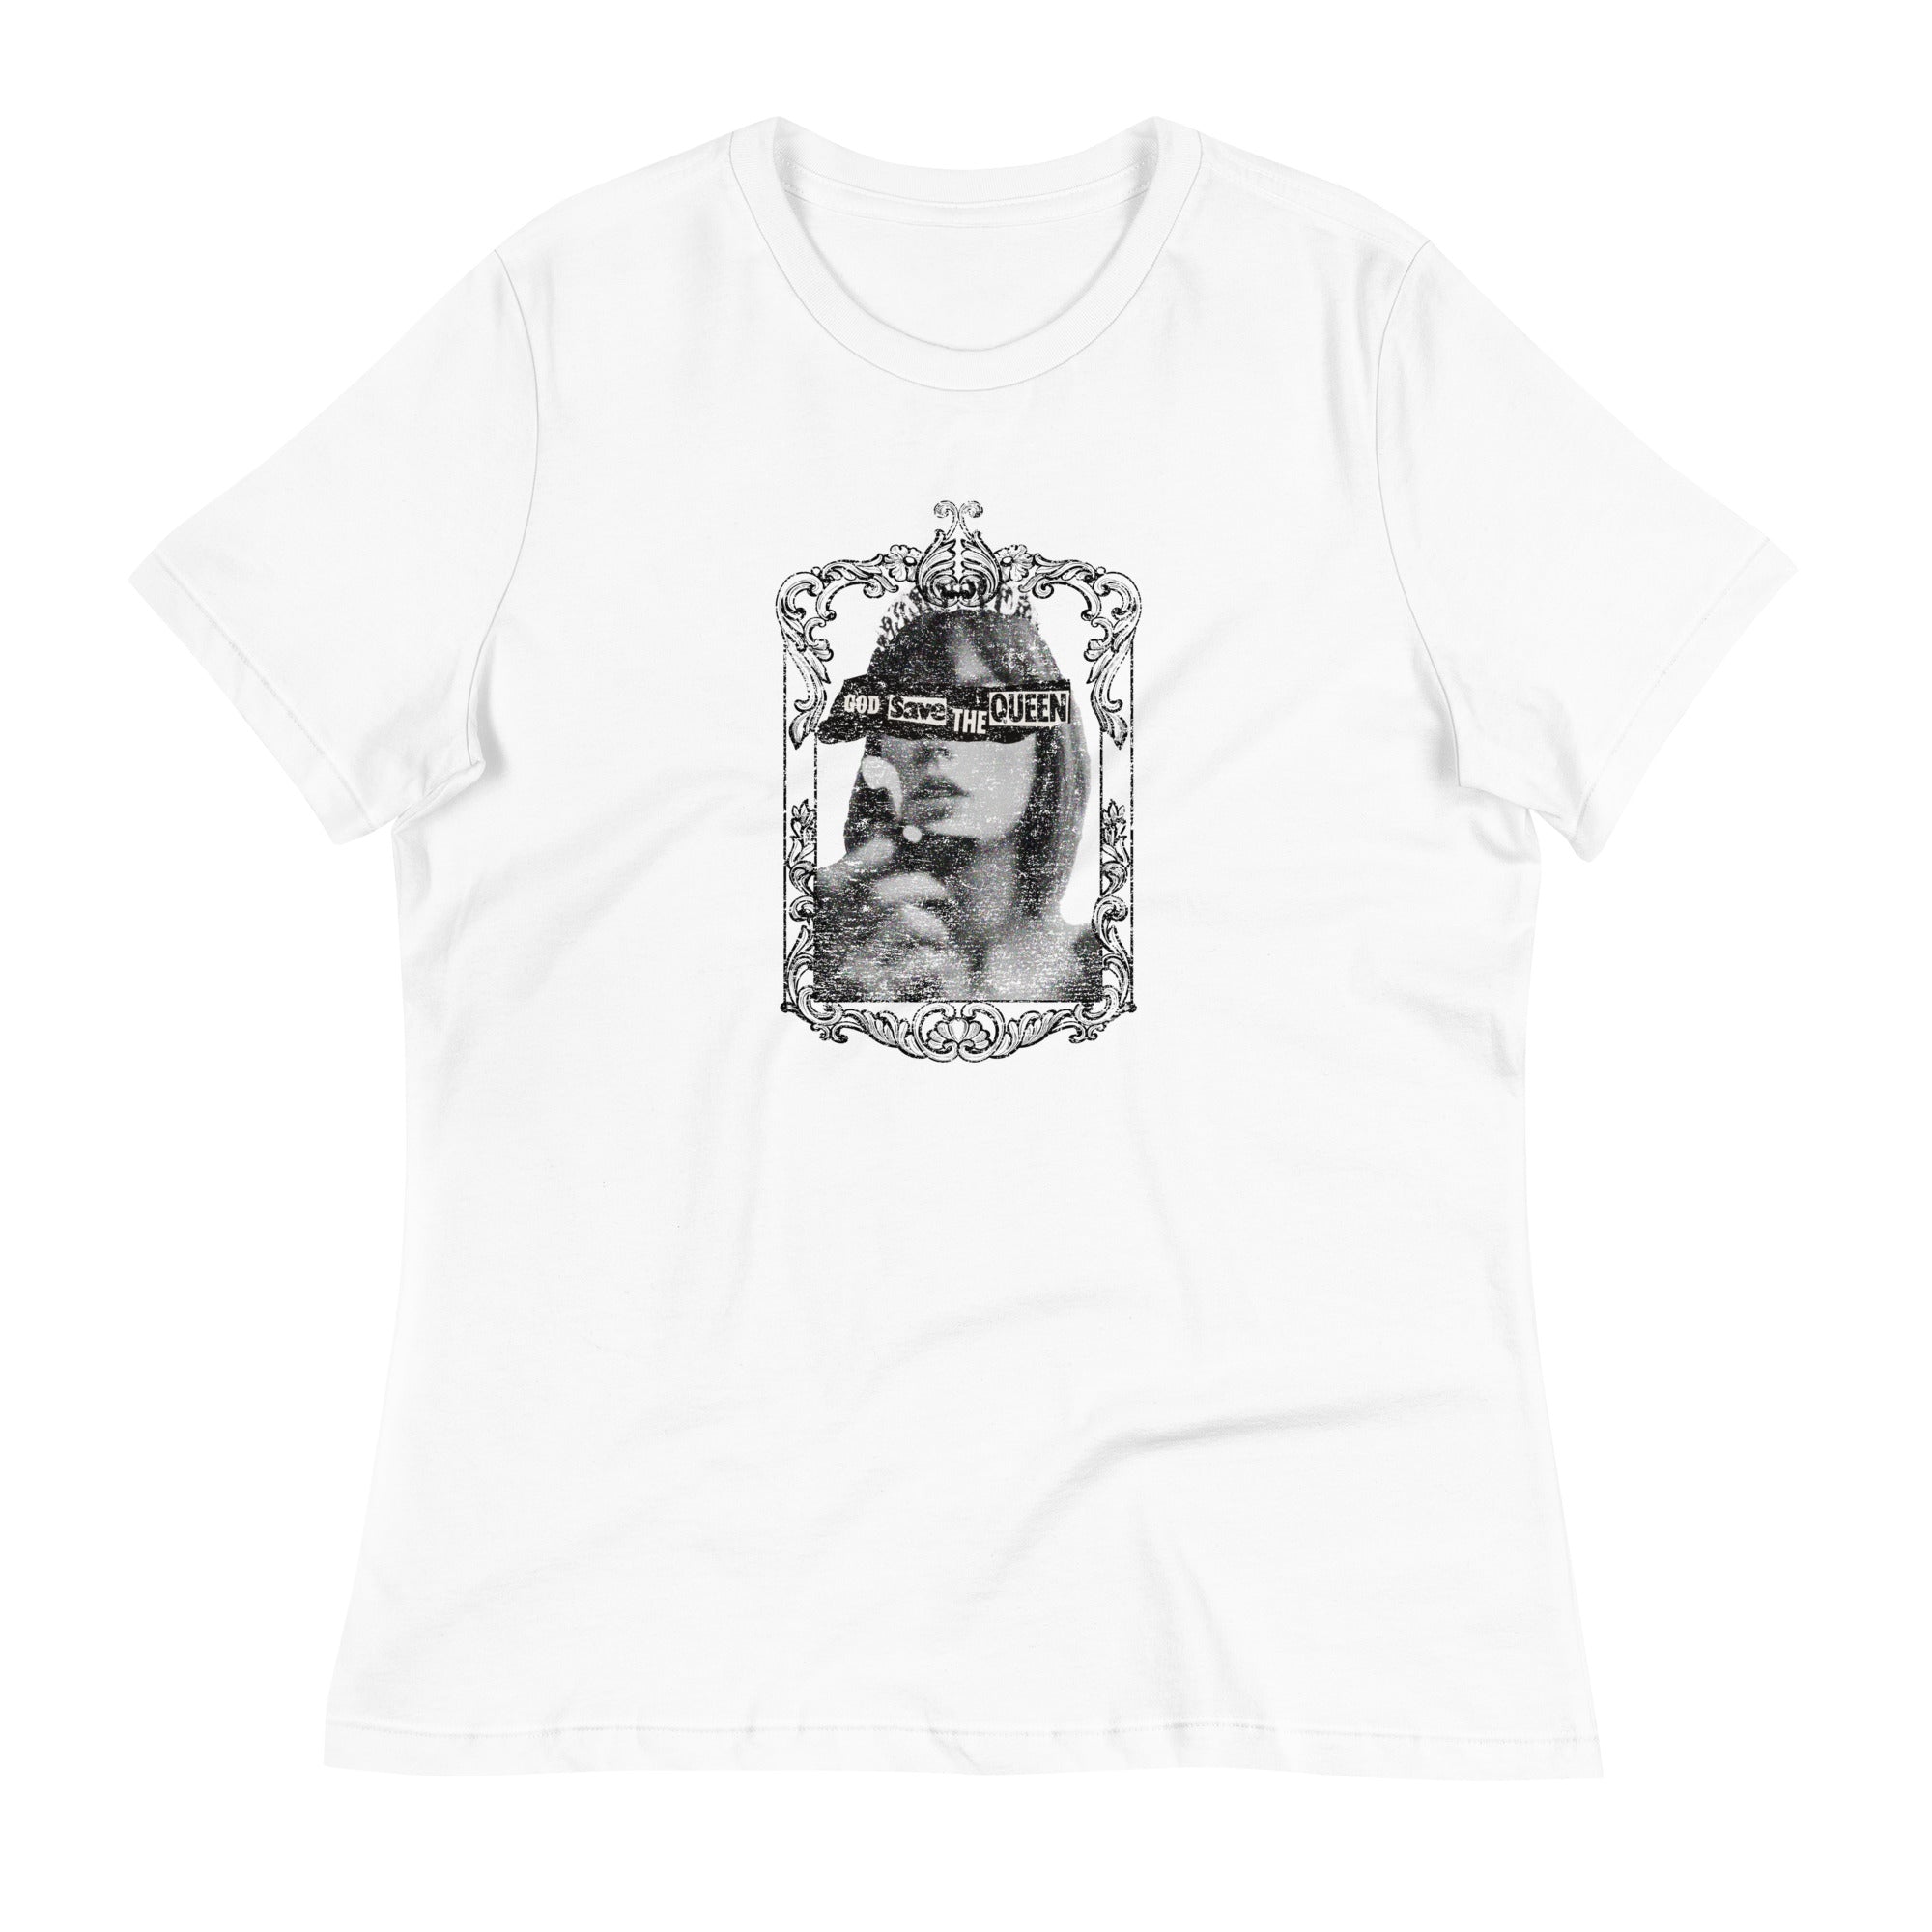 God Save The Queen - Taylor Swift - Women's Relaxed T-Shirt